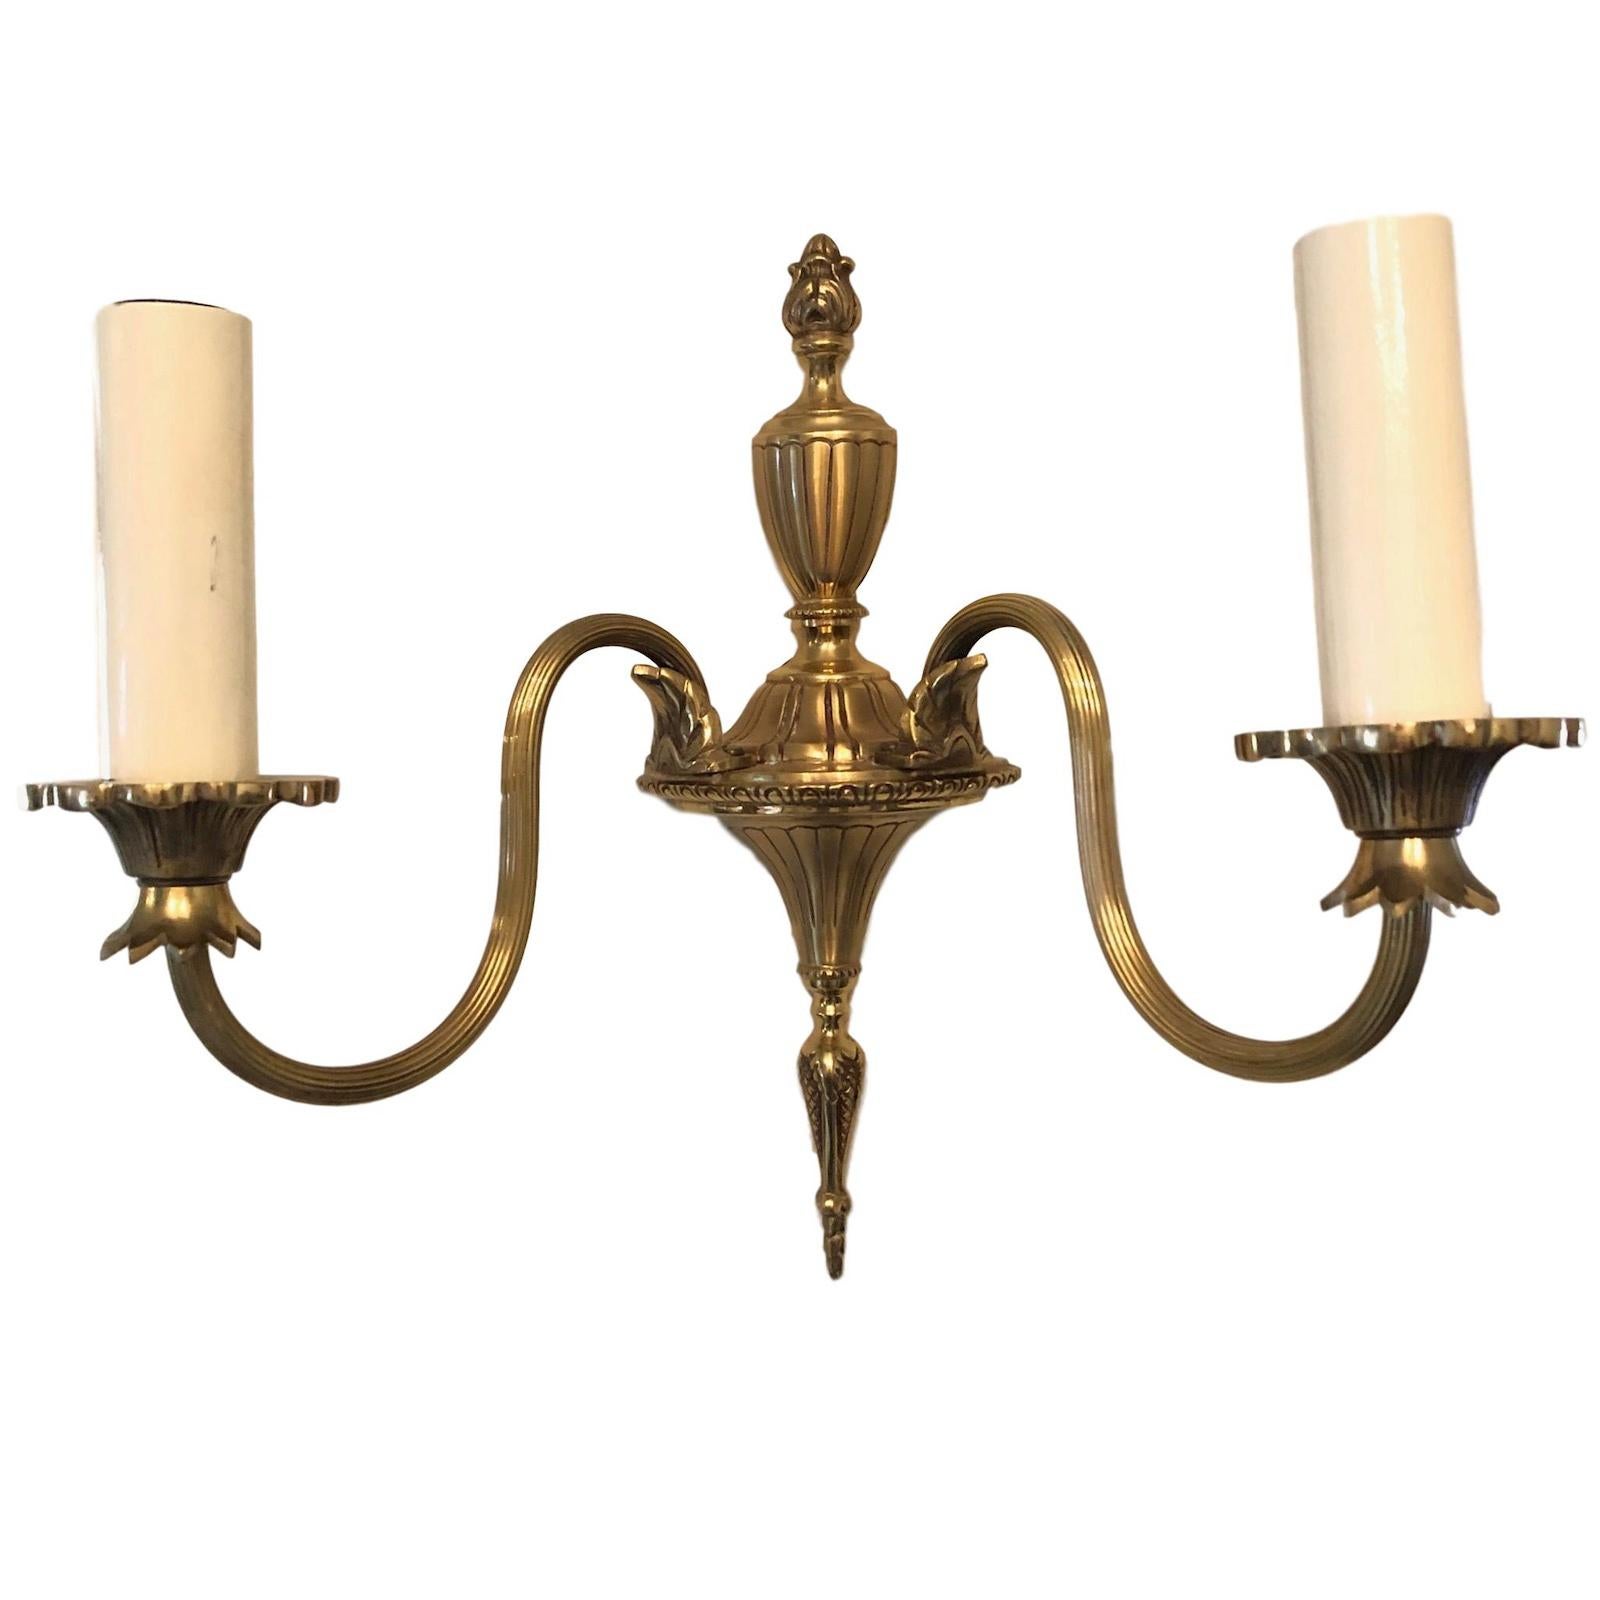 A stunning pair of heavy bronze wall sconces. Each consisting of a stylish Empire style design. Each fixture requires two European E14 / 110 Volt candelabra bulbs, each bulb up to 40 watts.